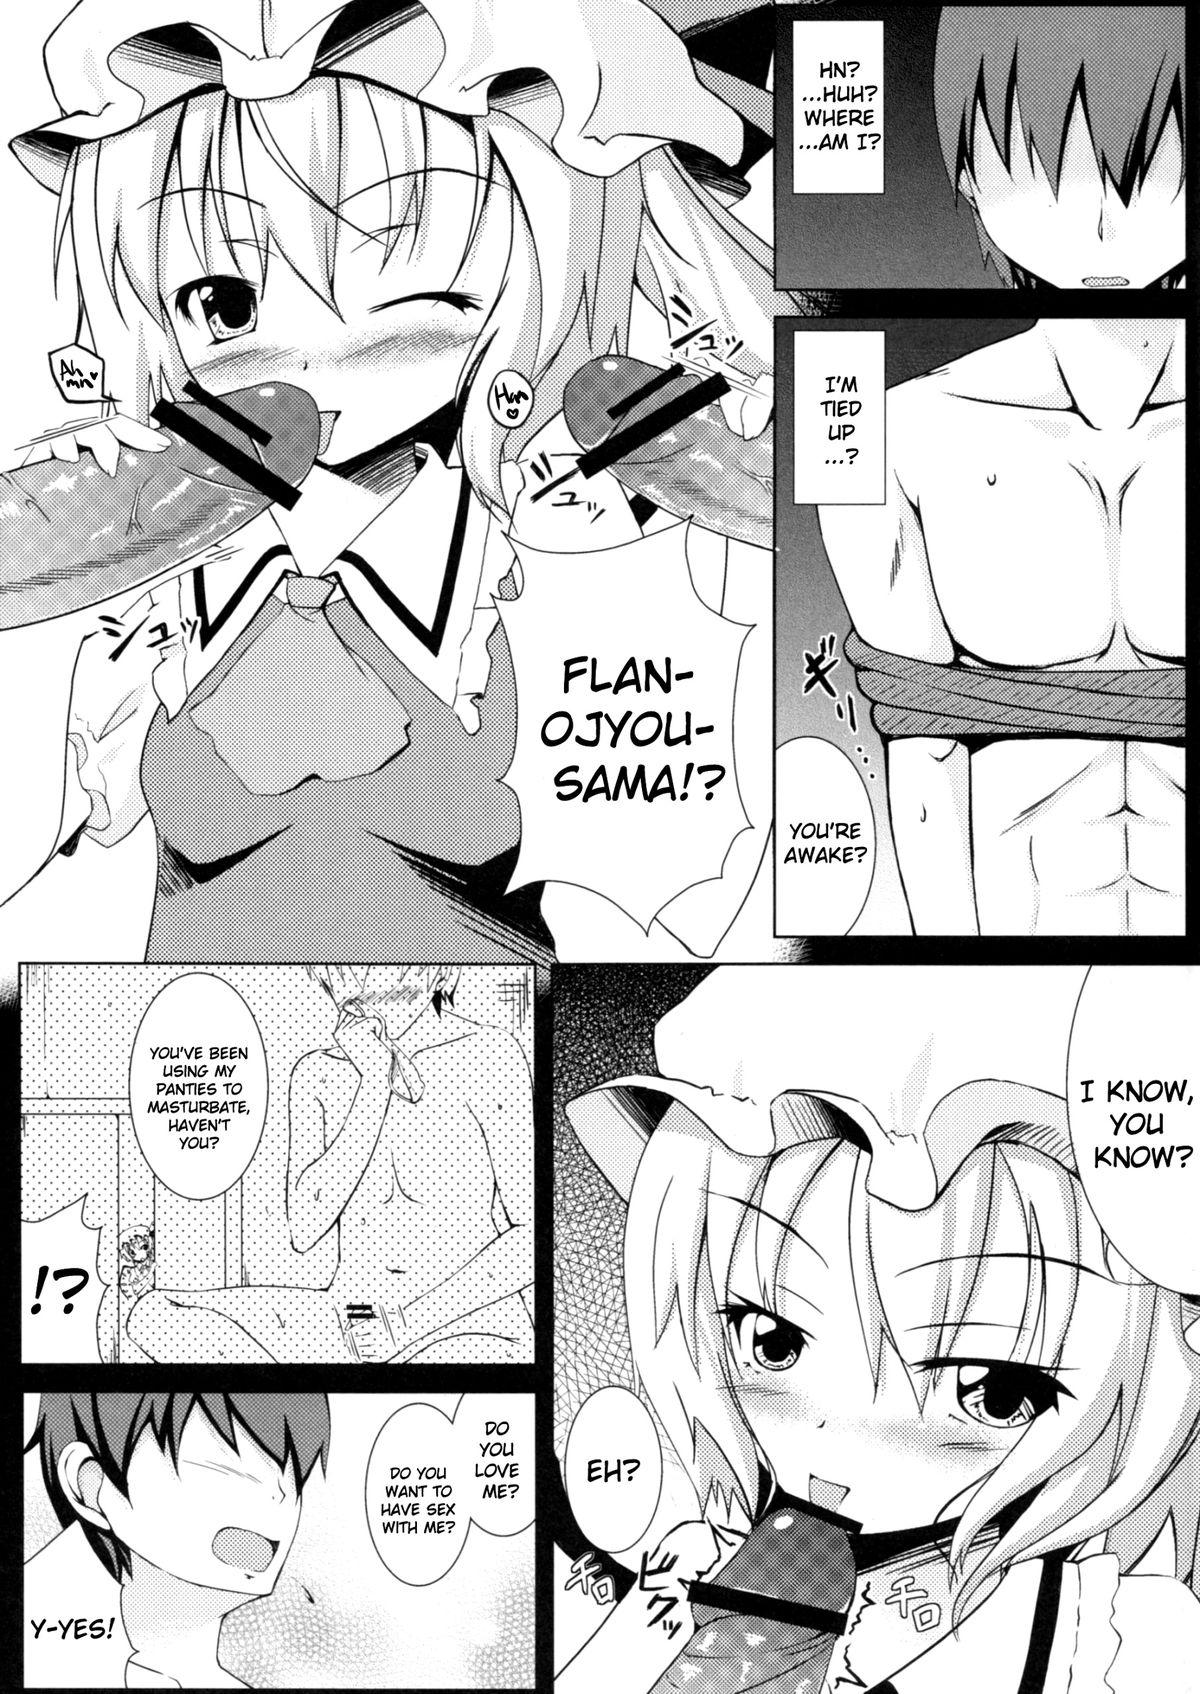 Huge Boobs NTR Flan-chan - Touhou project Toys - Page 2